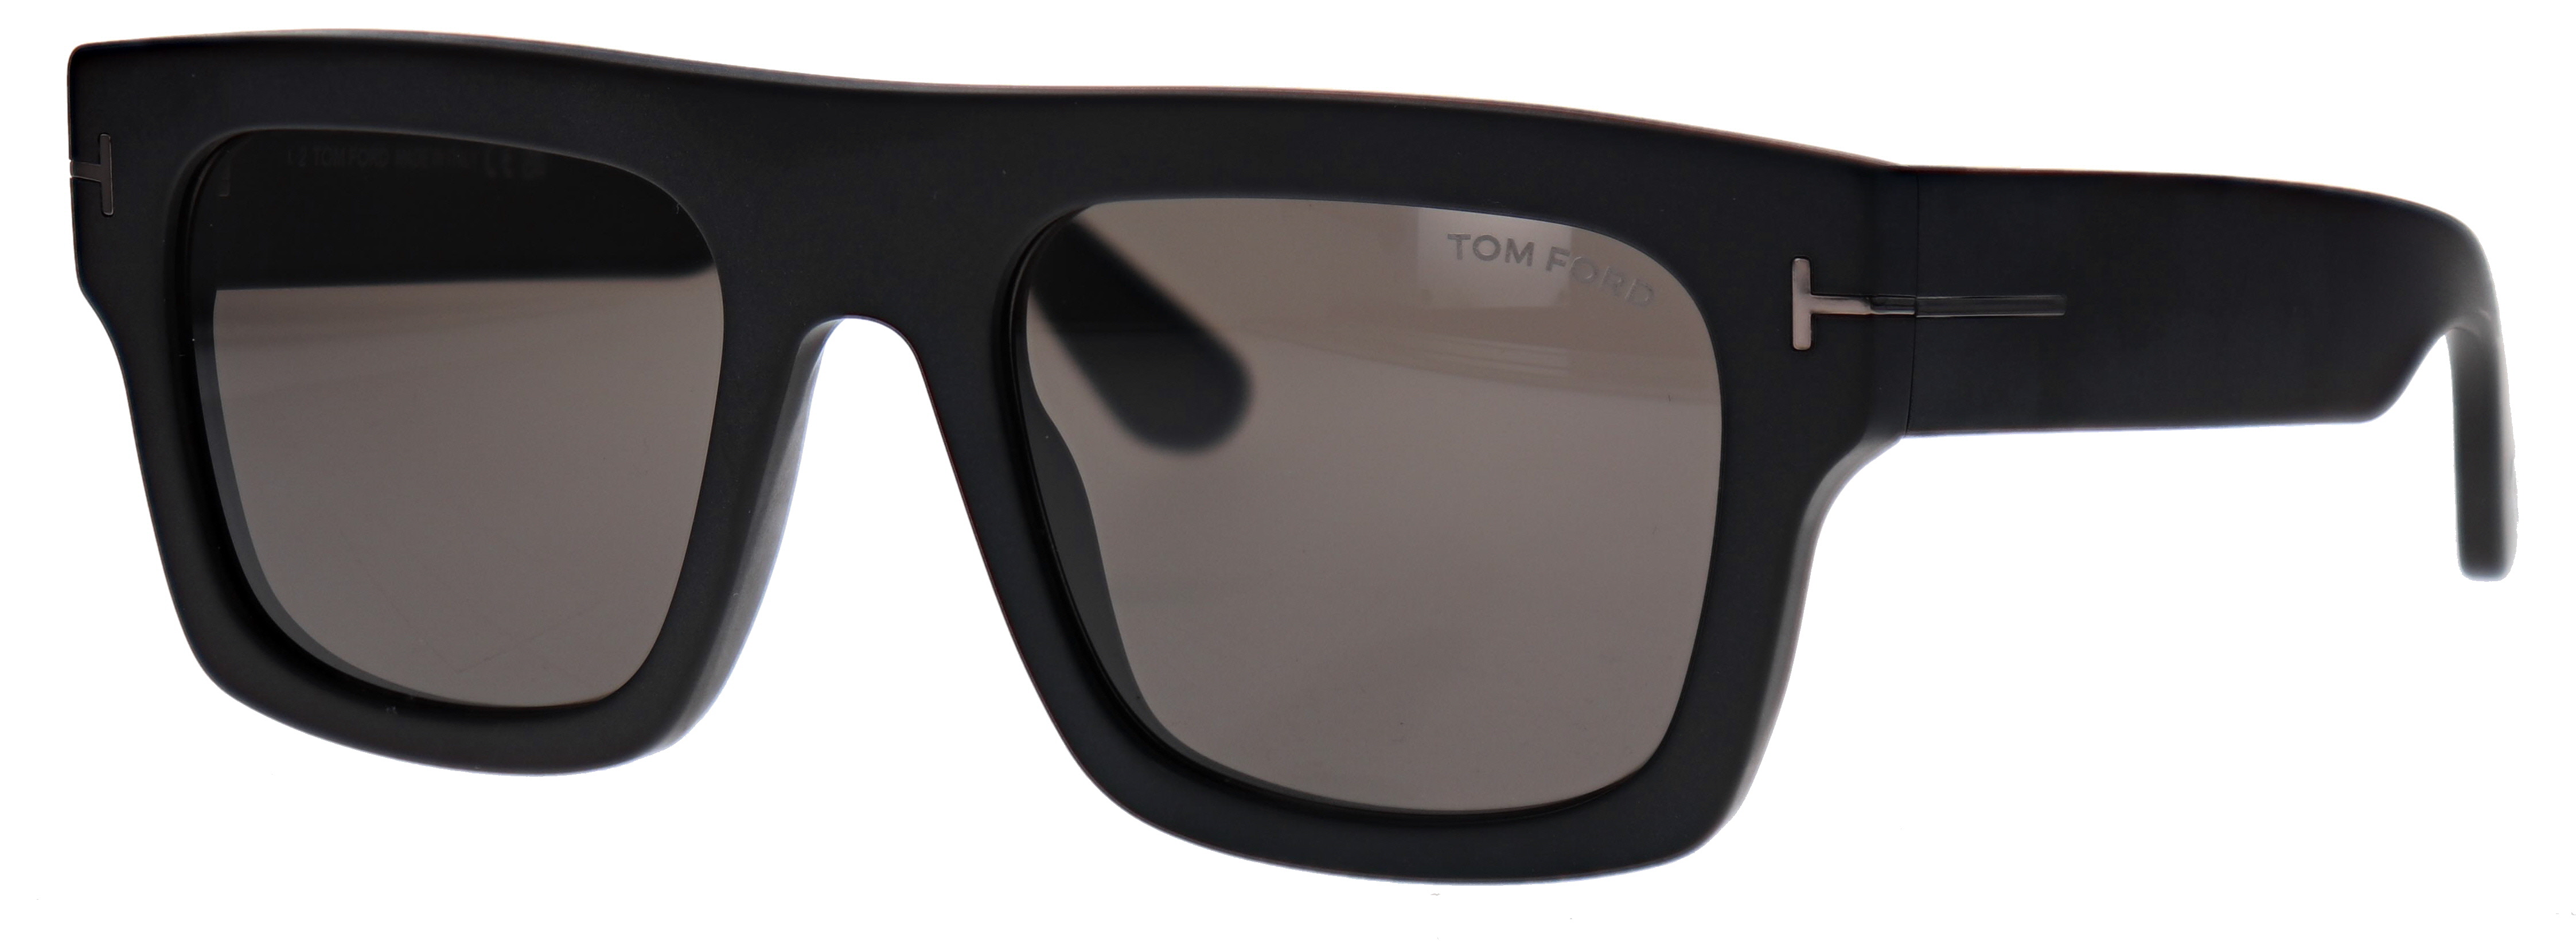 Tom Ford Fausto TF711-N